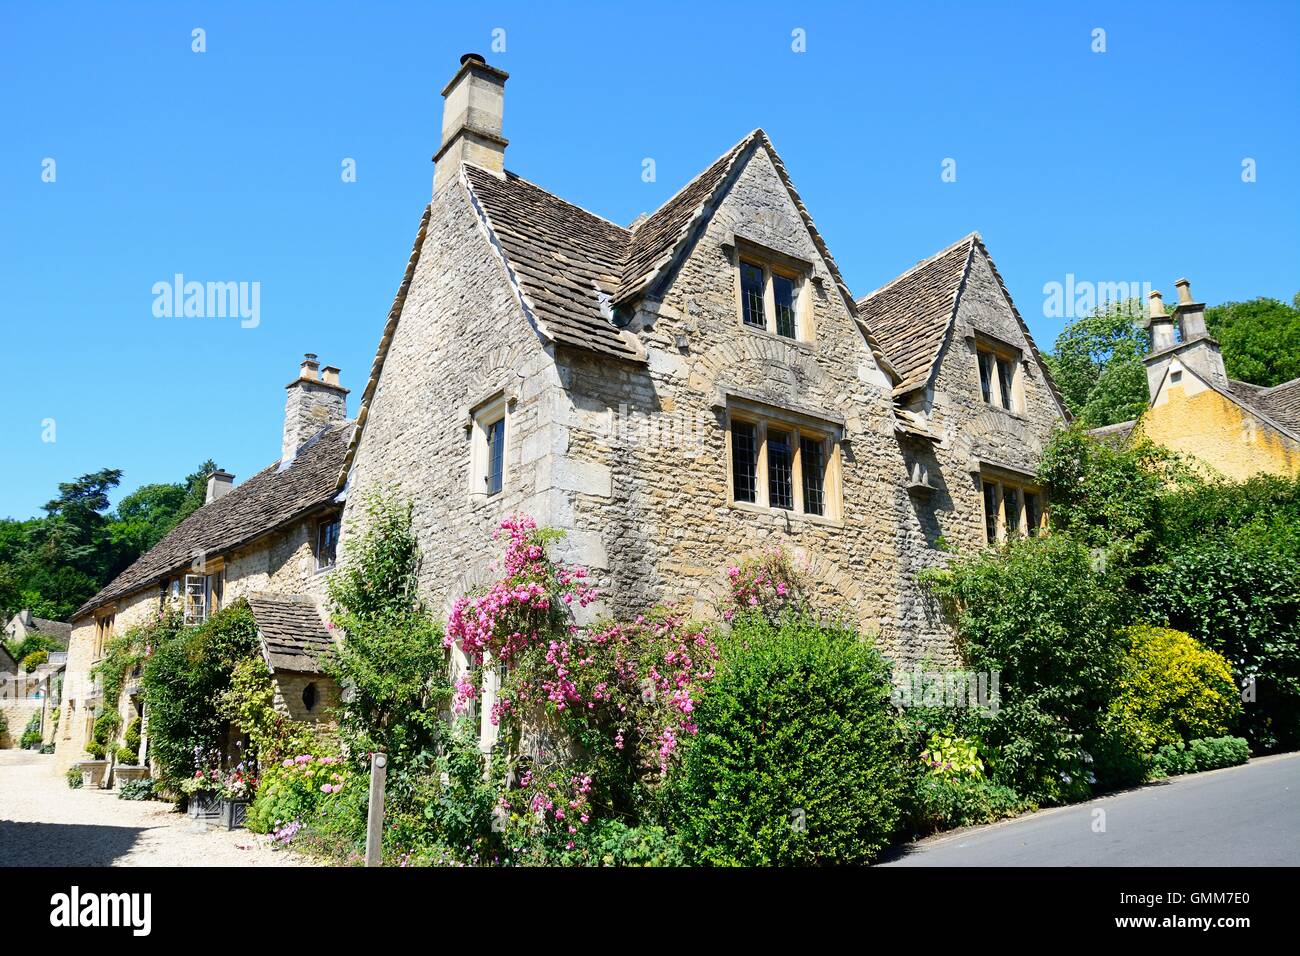 Cotswold stone buildings in the village centre, Castle Combe, Wiltshire, England, UK, Western Europe. Stock Photo